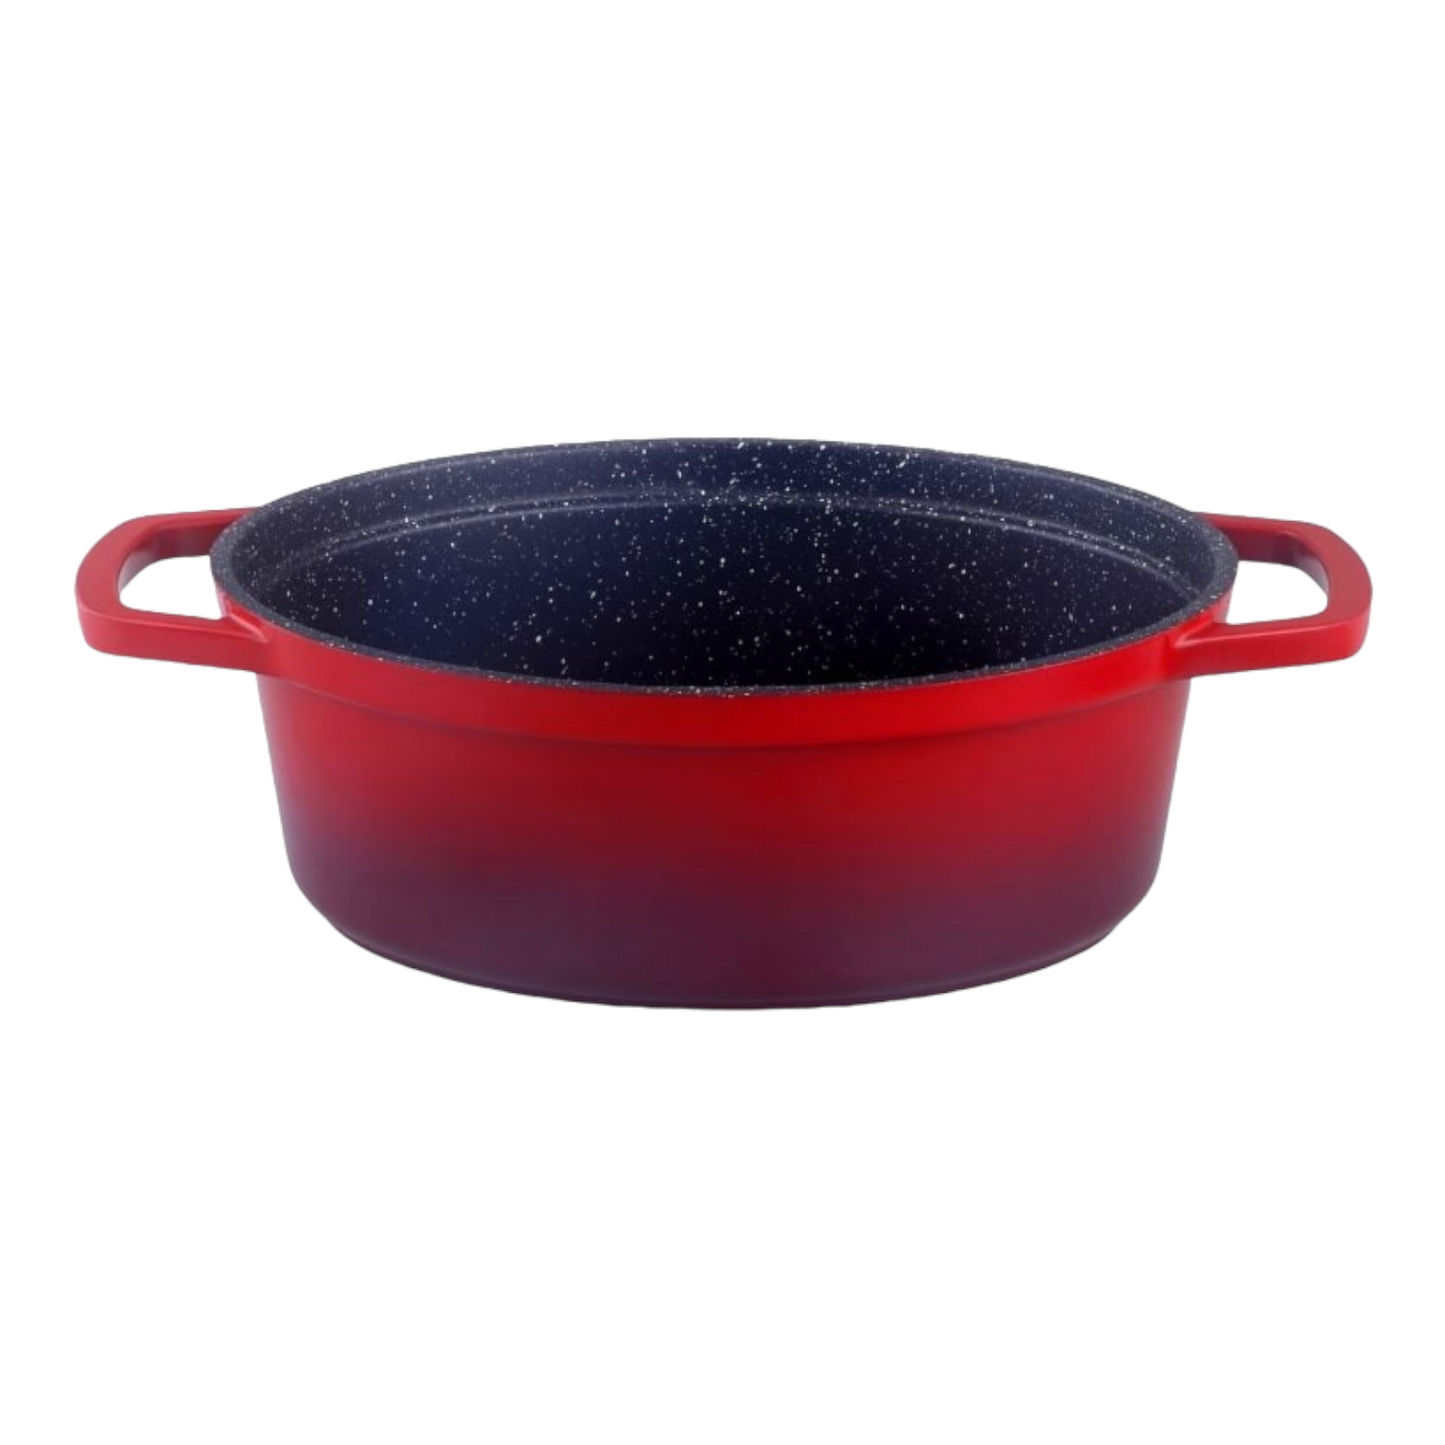 COCOT COTTE 26 CM RED OVAL CAST ALUMINUM KAMBERG®